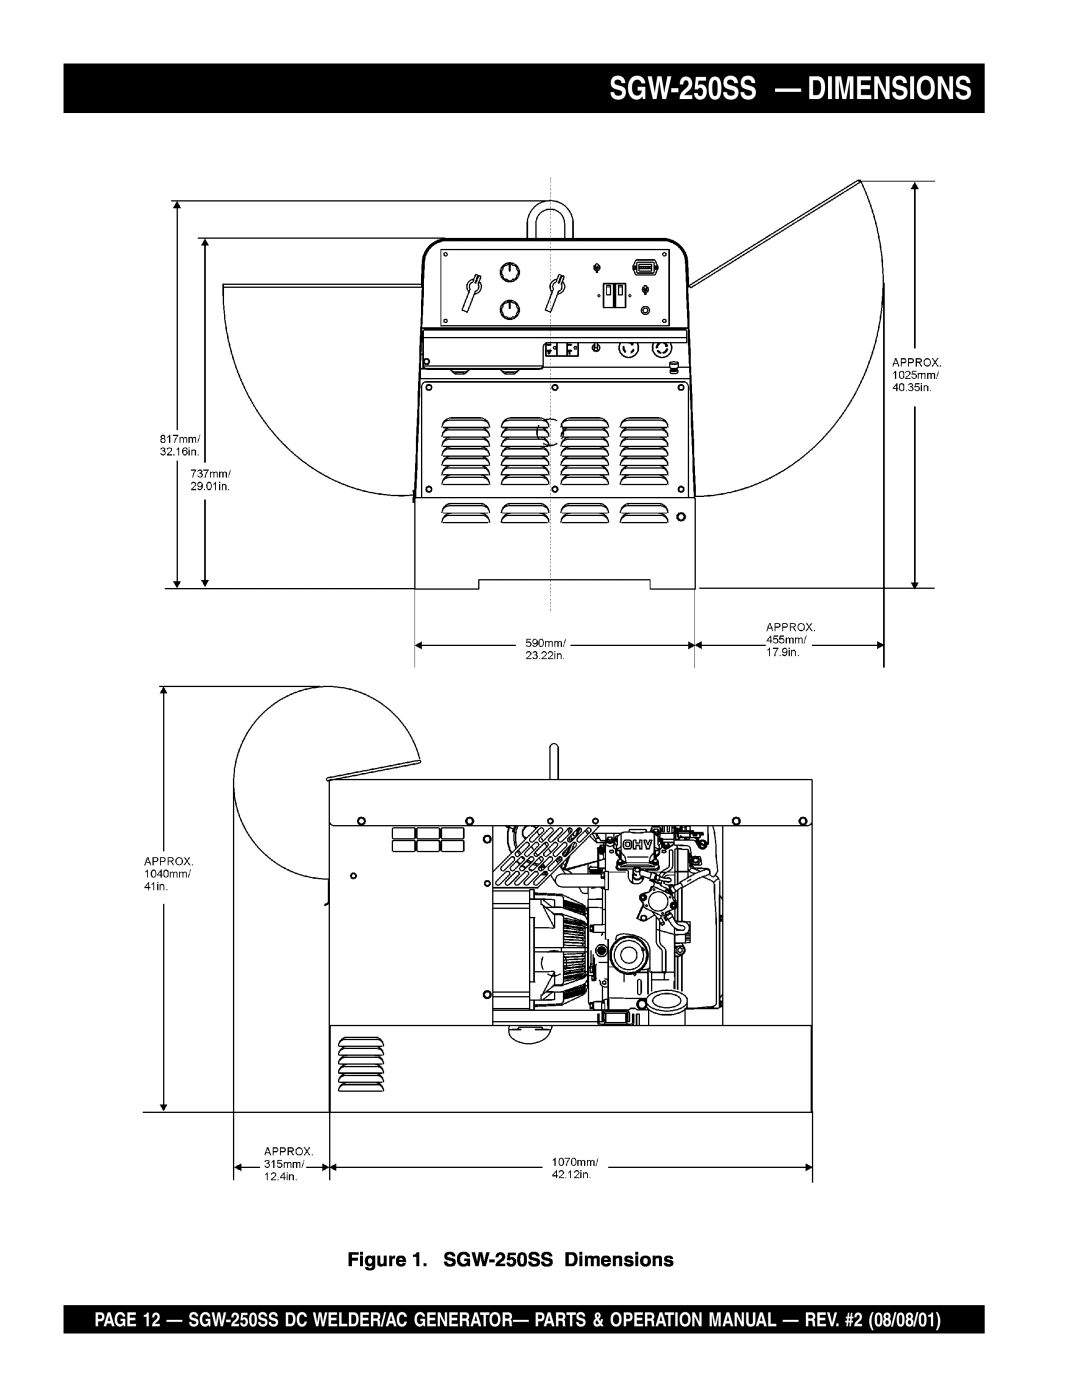 Multiquip operation manual SGW-250SS- DIMENSIONS, SGW-250SSDimensions 